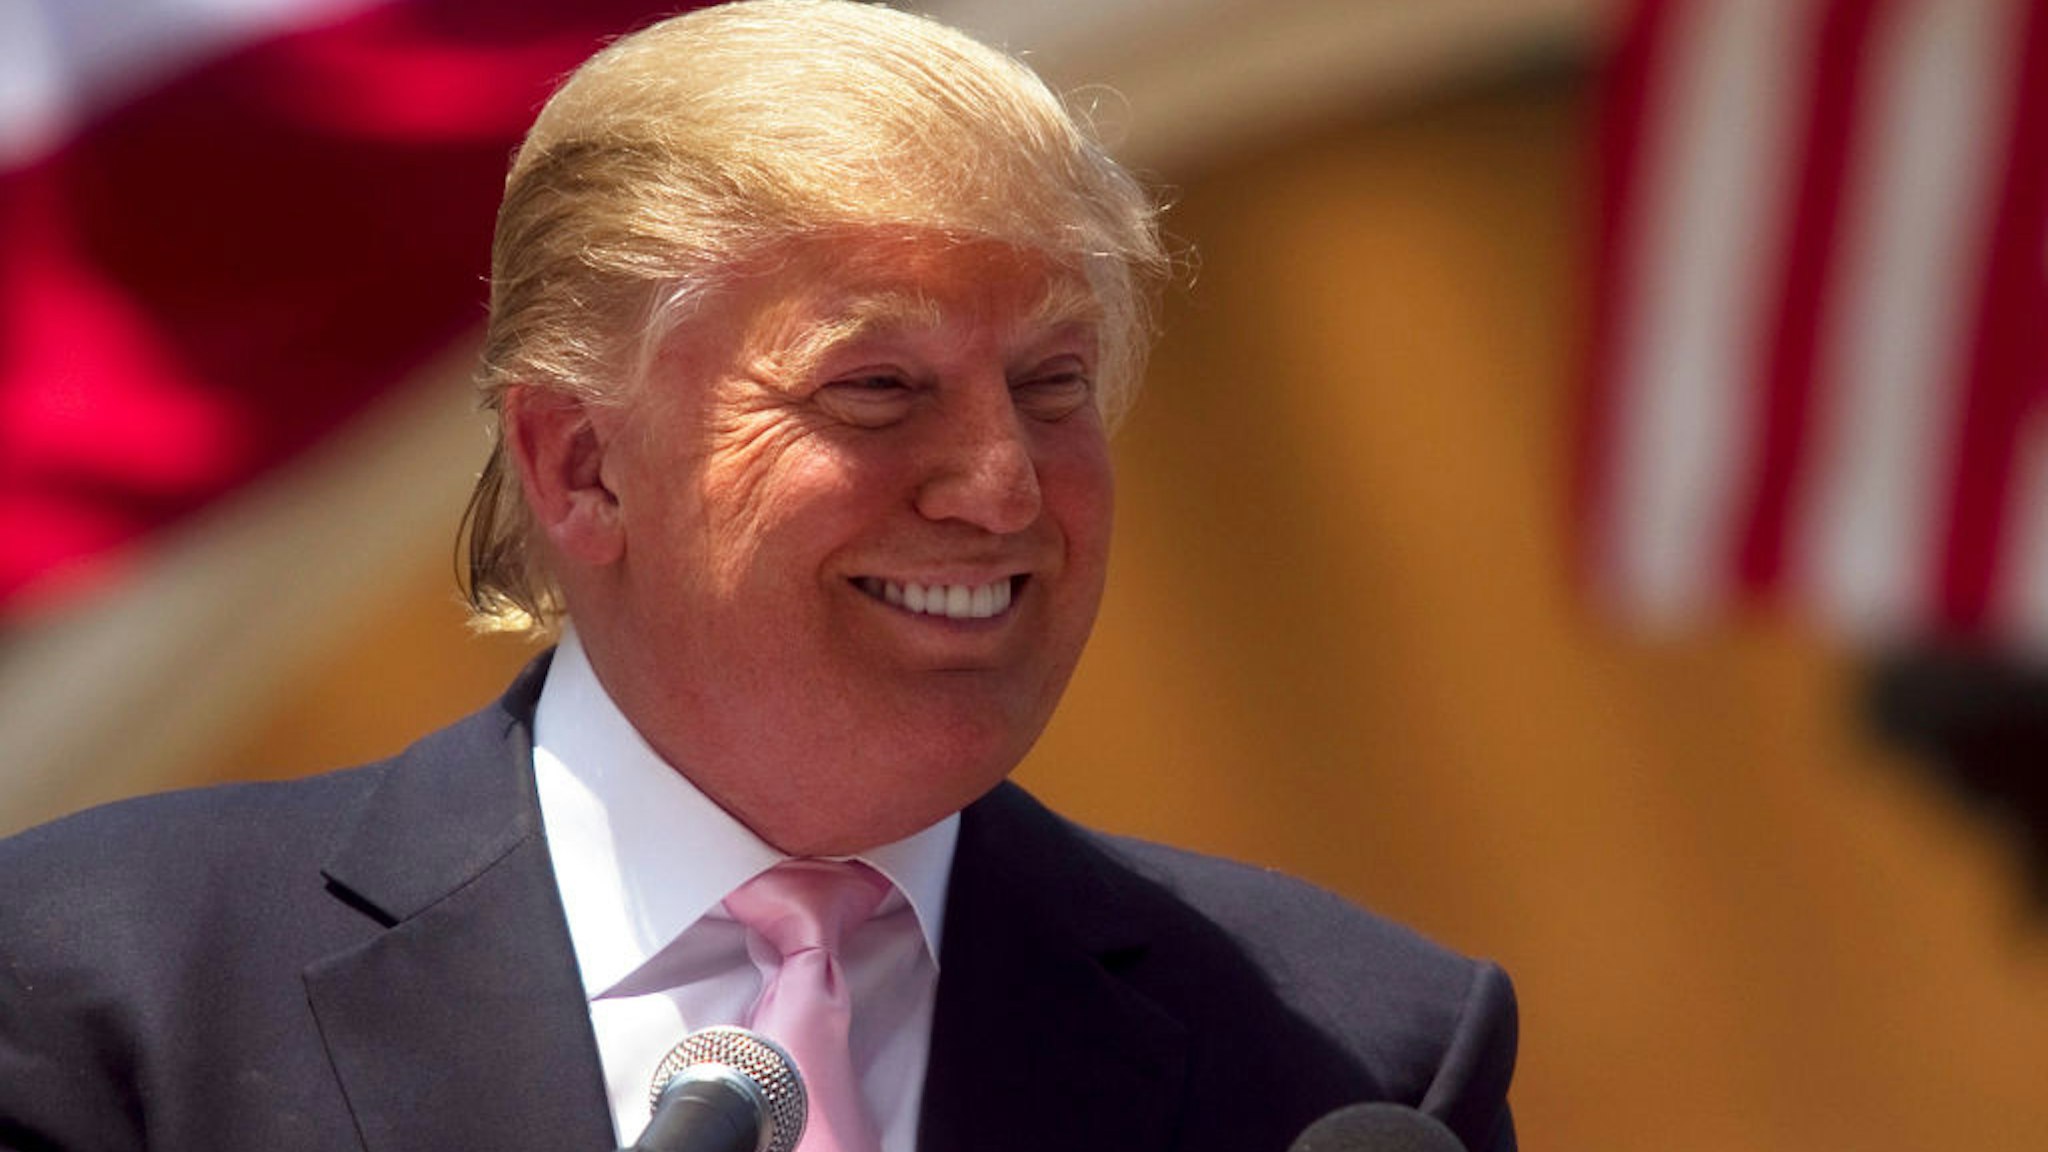 Billionaire Donald Trump laughs while speaking to a crowd at the 2011 Palm Beach County Tax Day Tea Party on April 16, 2011 at Sanborn Square in Boca Raton, Florida.